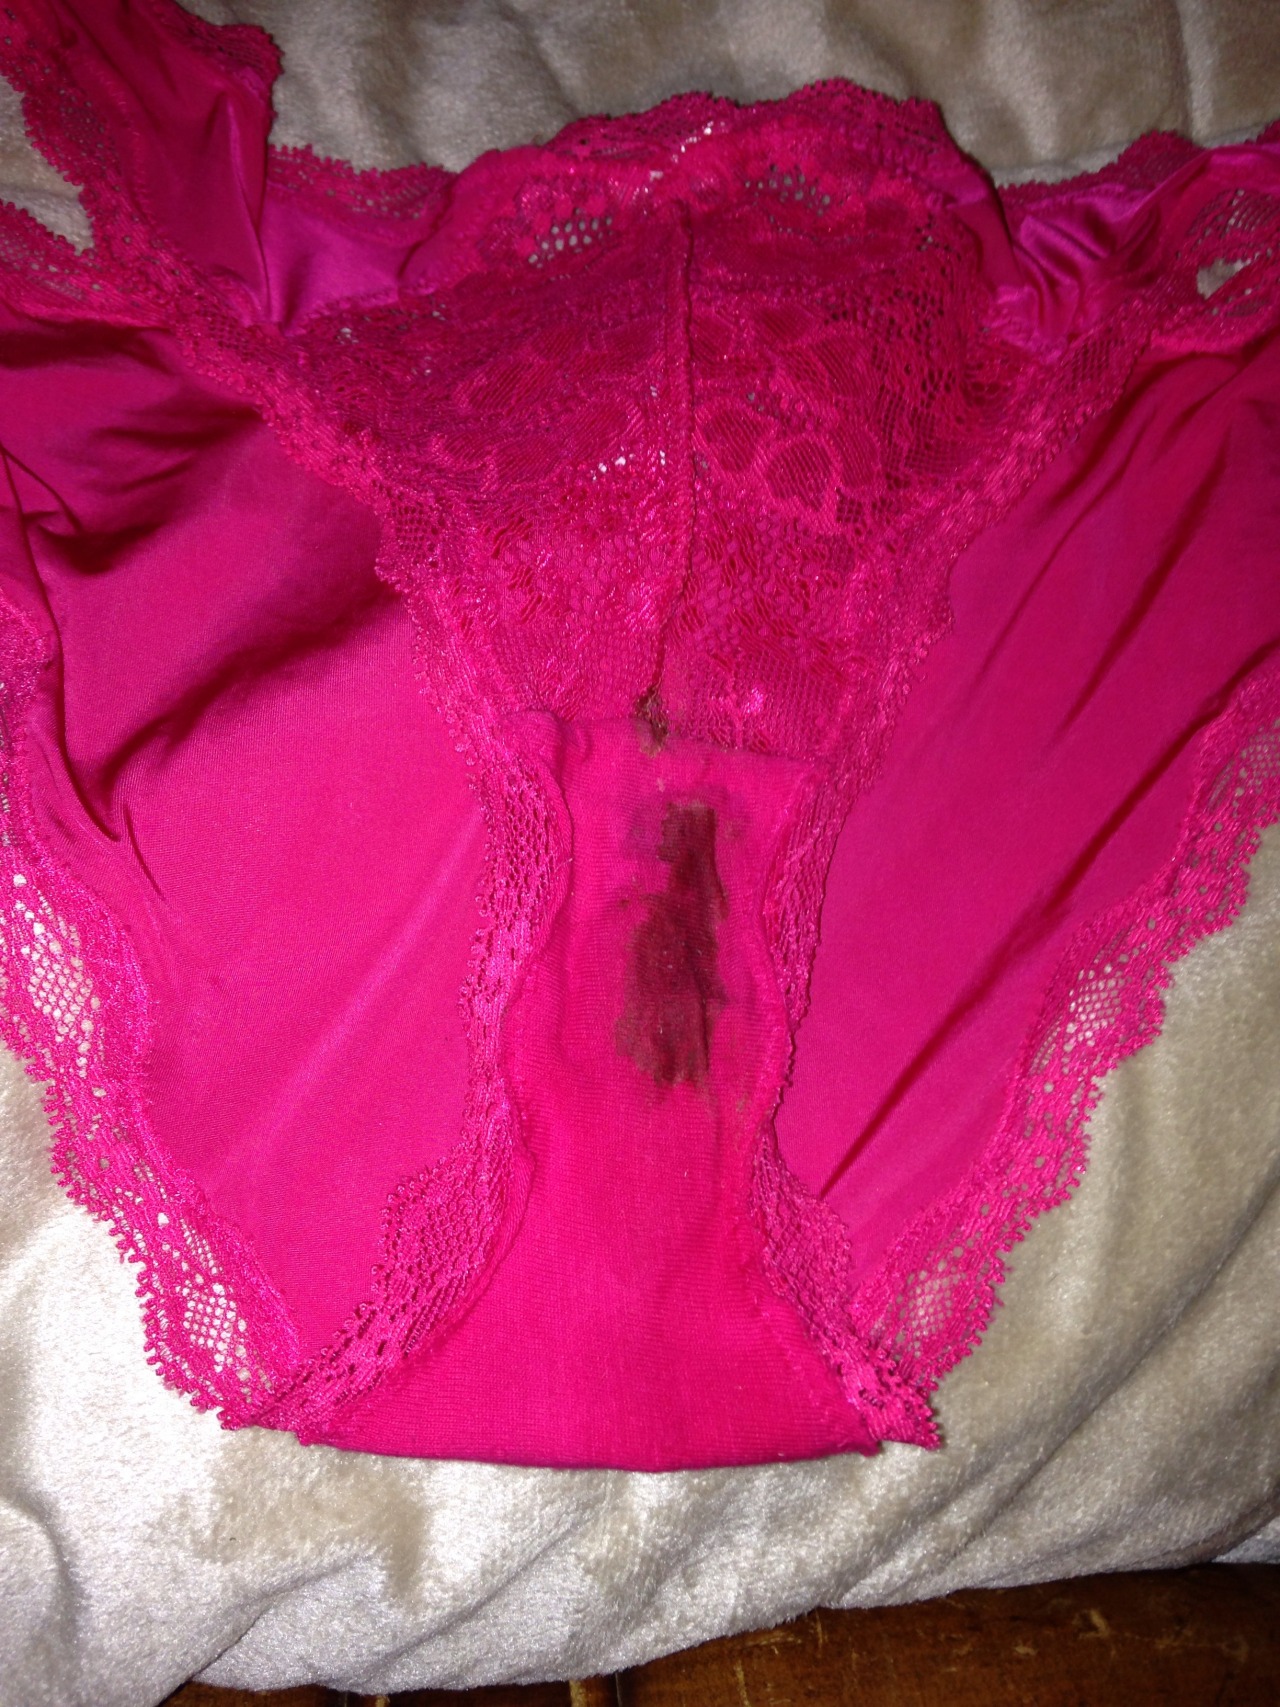  fletchbeast1 submitted:  Wife’s hot pink VS after the gym she gets HORNEY and